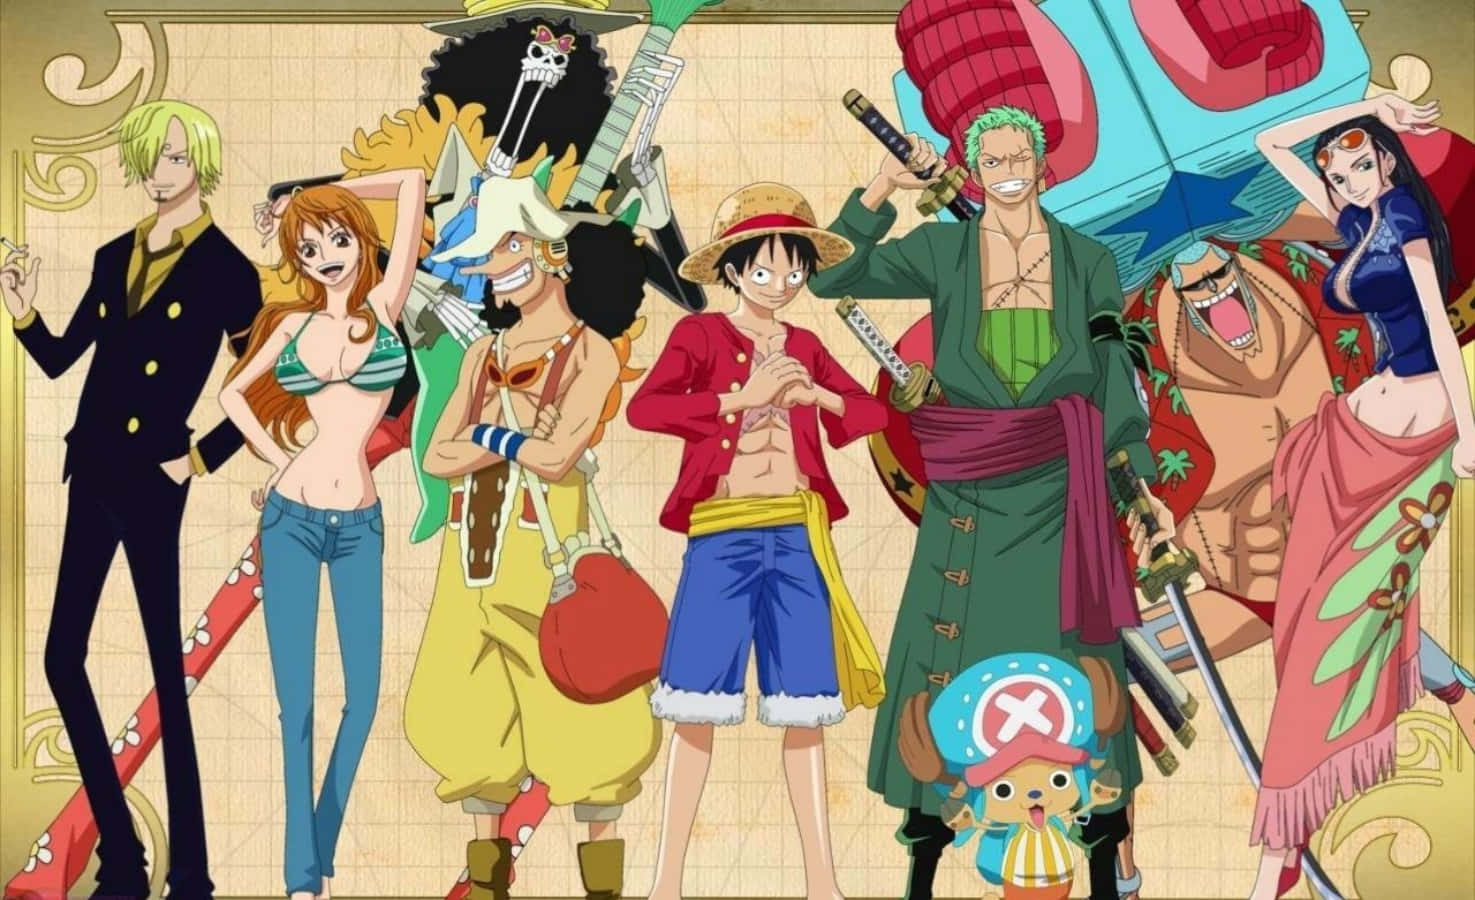 Download Join the Straw Hat Pirates Today! Wallpaper | Wallpapers.com